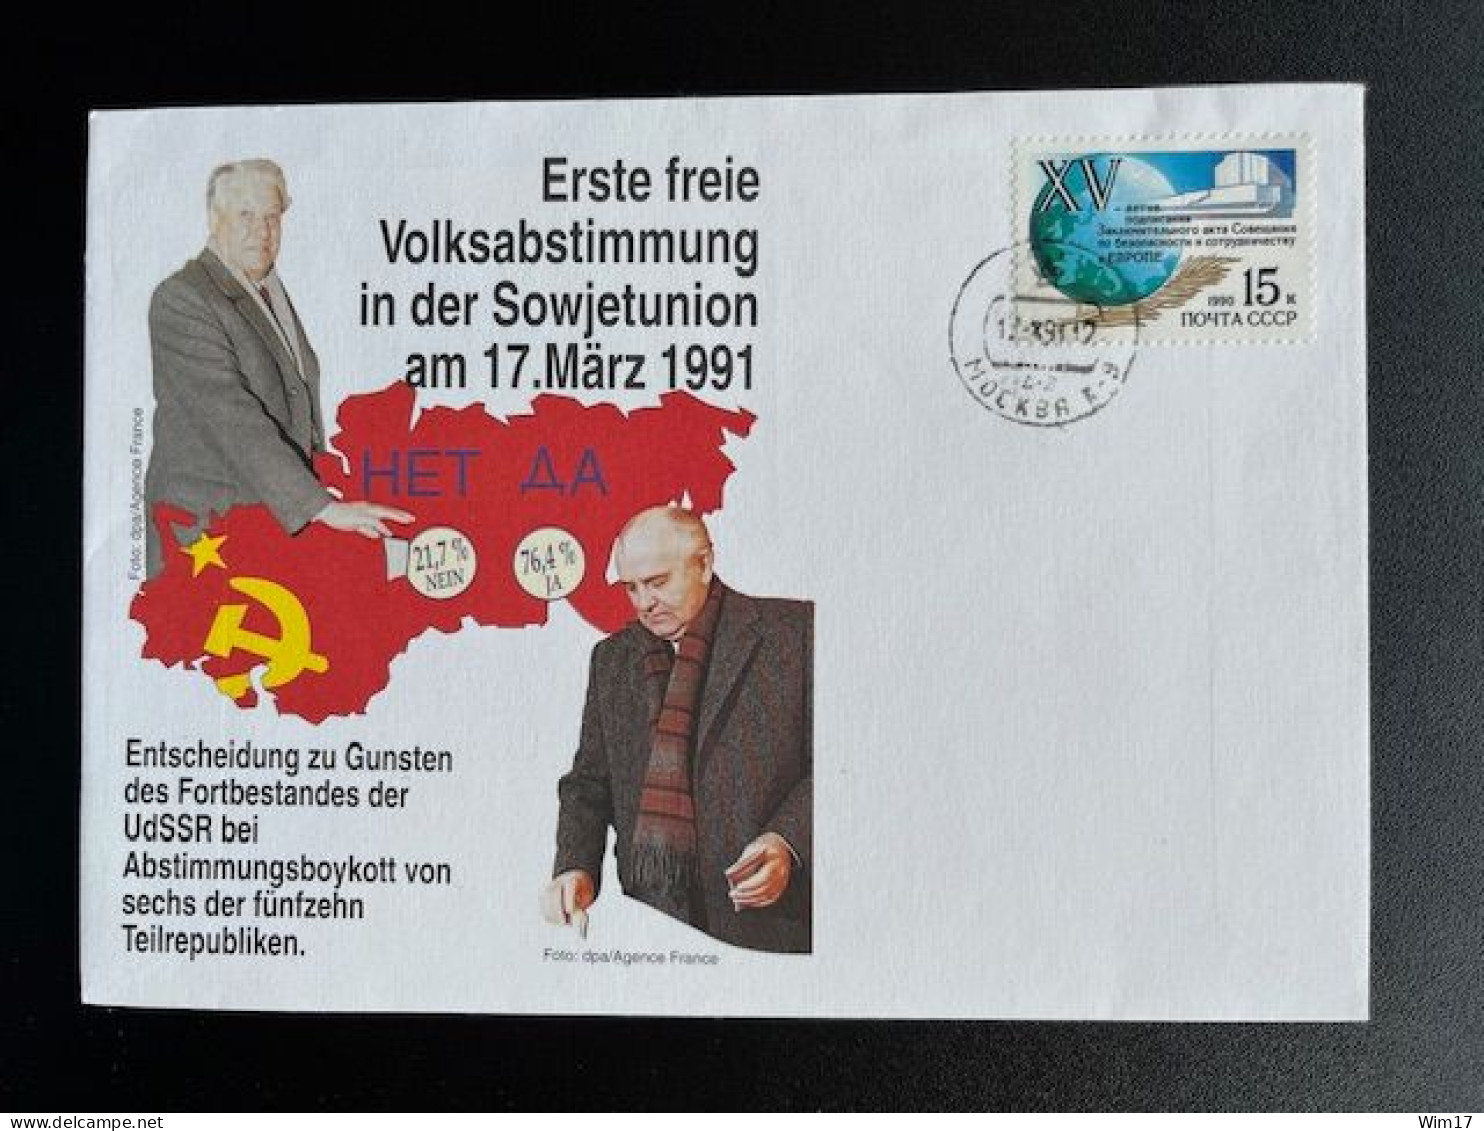 RUSSIA USSR 1991 SPECIAL COVER FIRST FREE ELECTIONS 17-03-1991 SOVJET UNIE CCCP SOVIET UNION - Briefe U. Dokumente